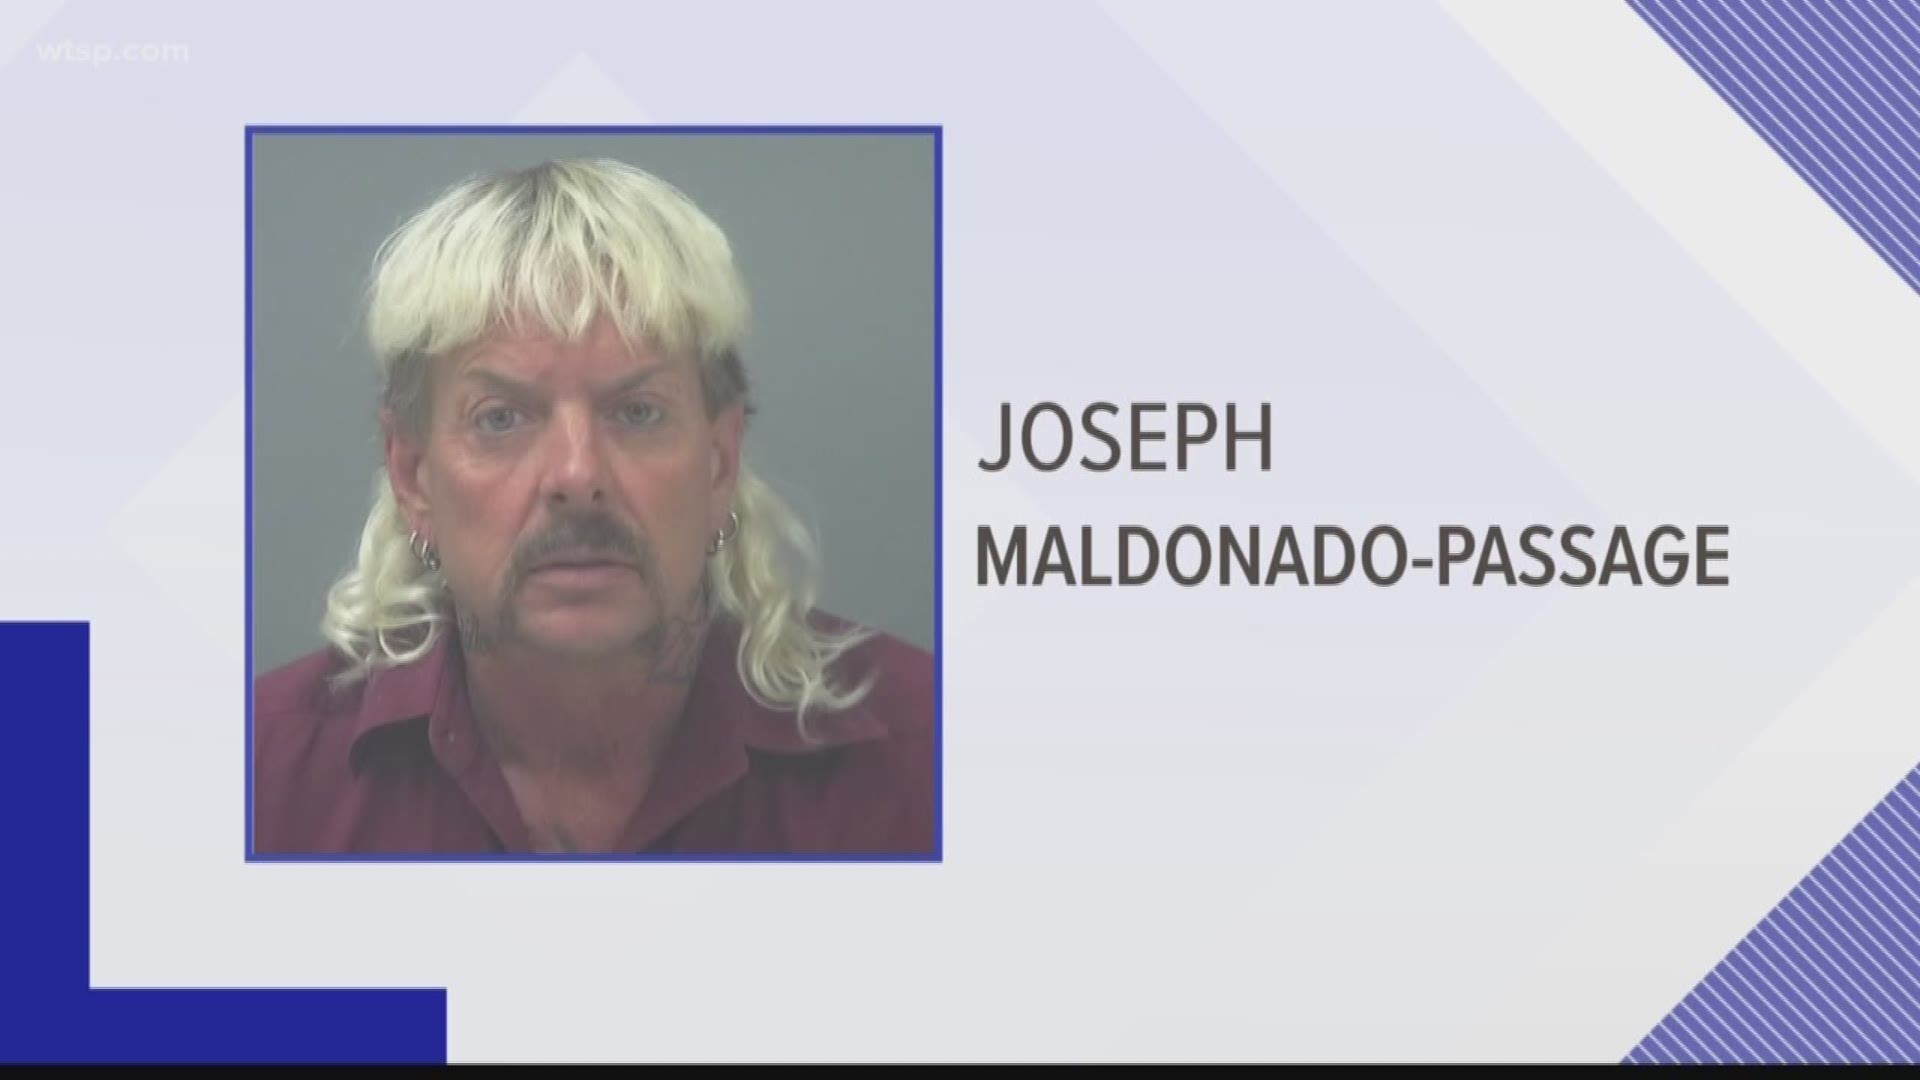 Joseph Maldonado-Passage was angry because of the criticism the Tampa woman leveled at him for his treatment of animals.